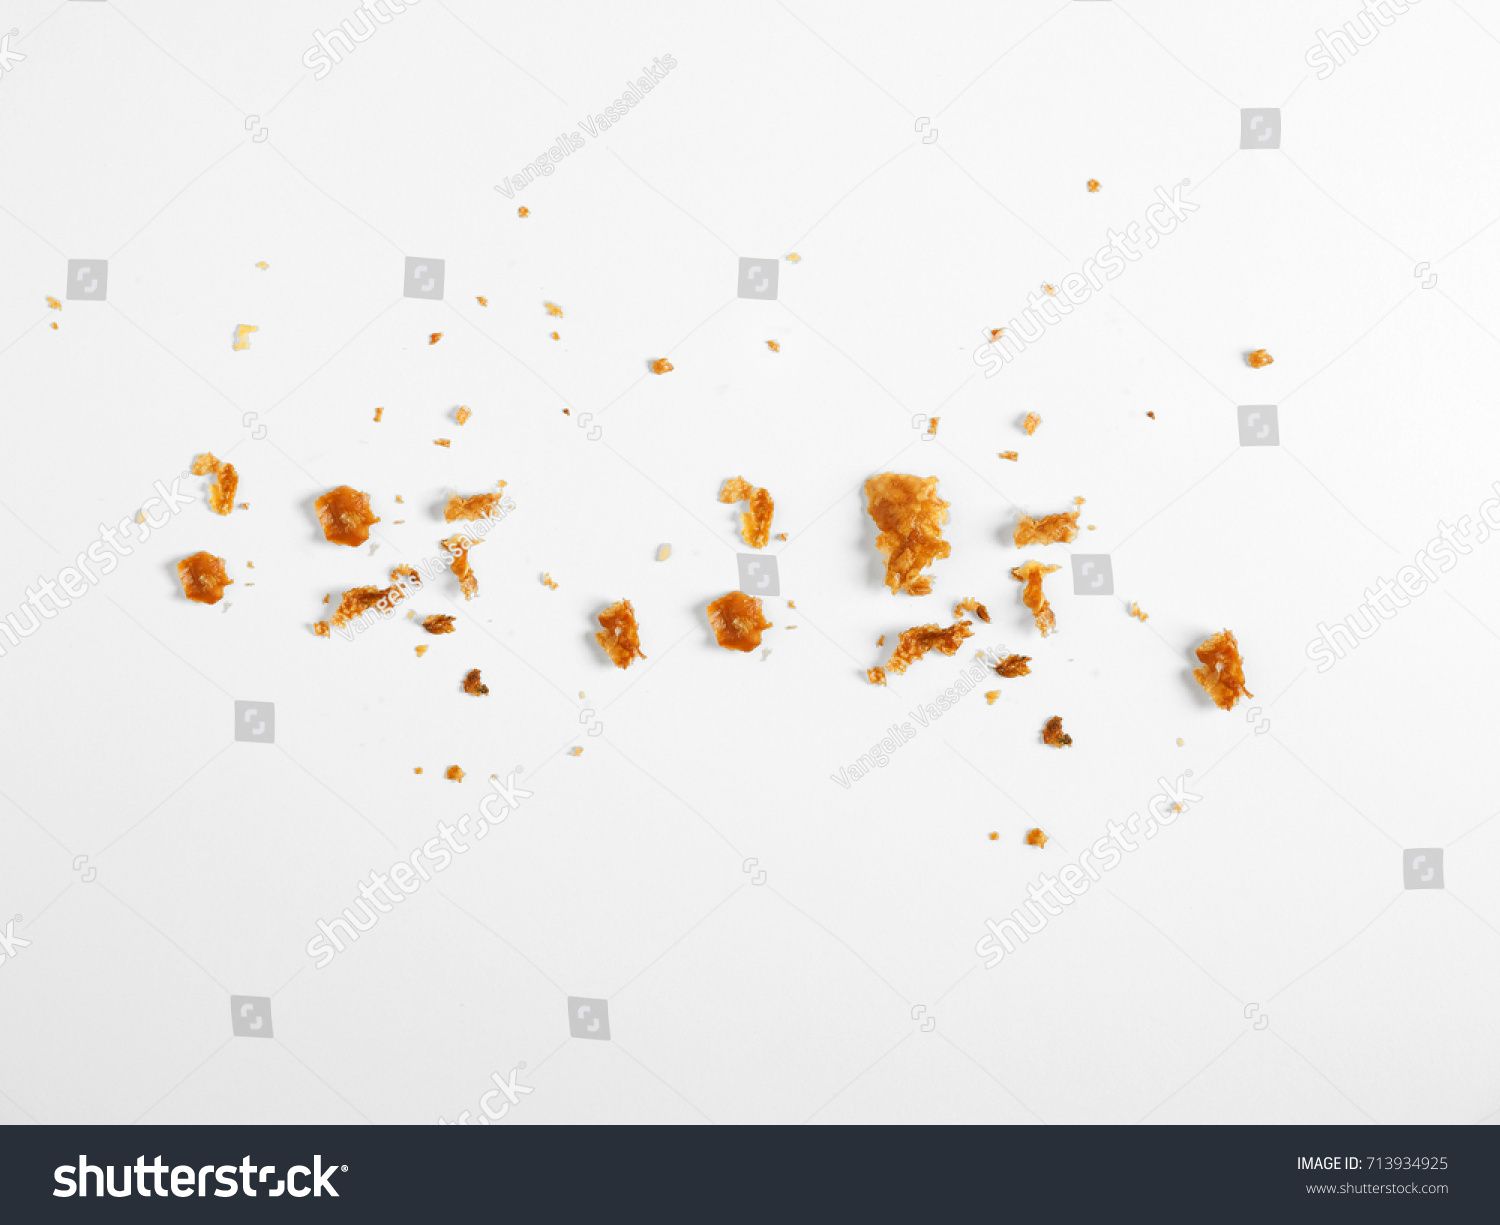 Scattered Crumbs Isolated On White Background